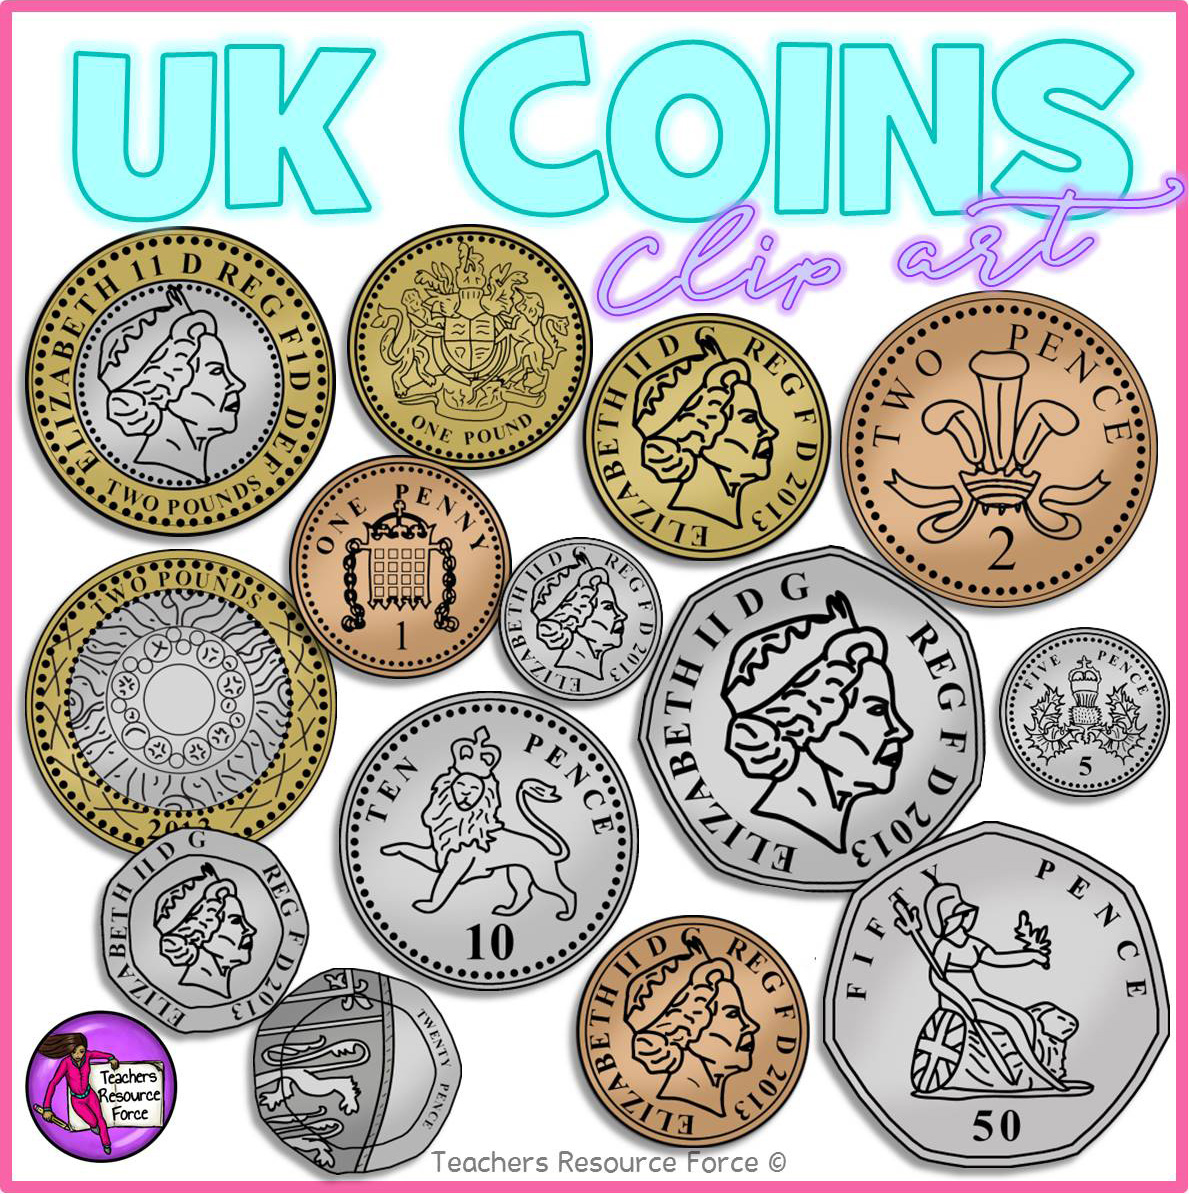 uk coins clipart - photo #3